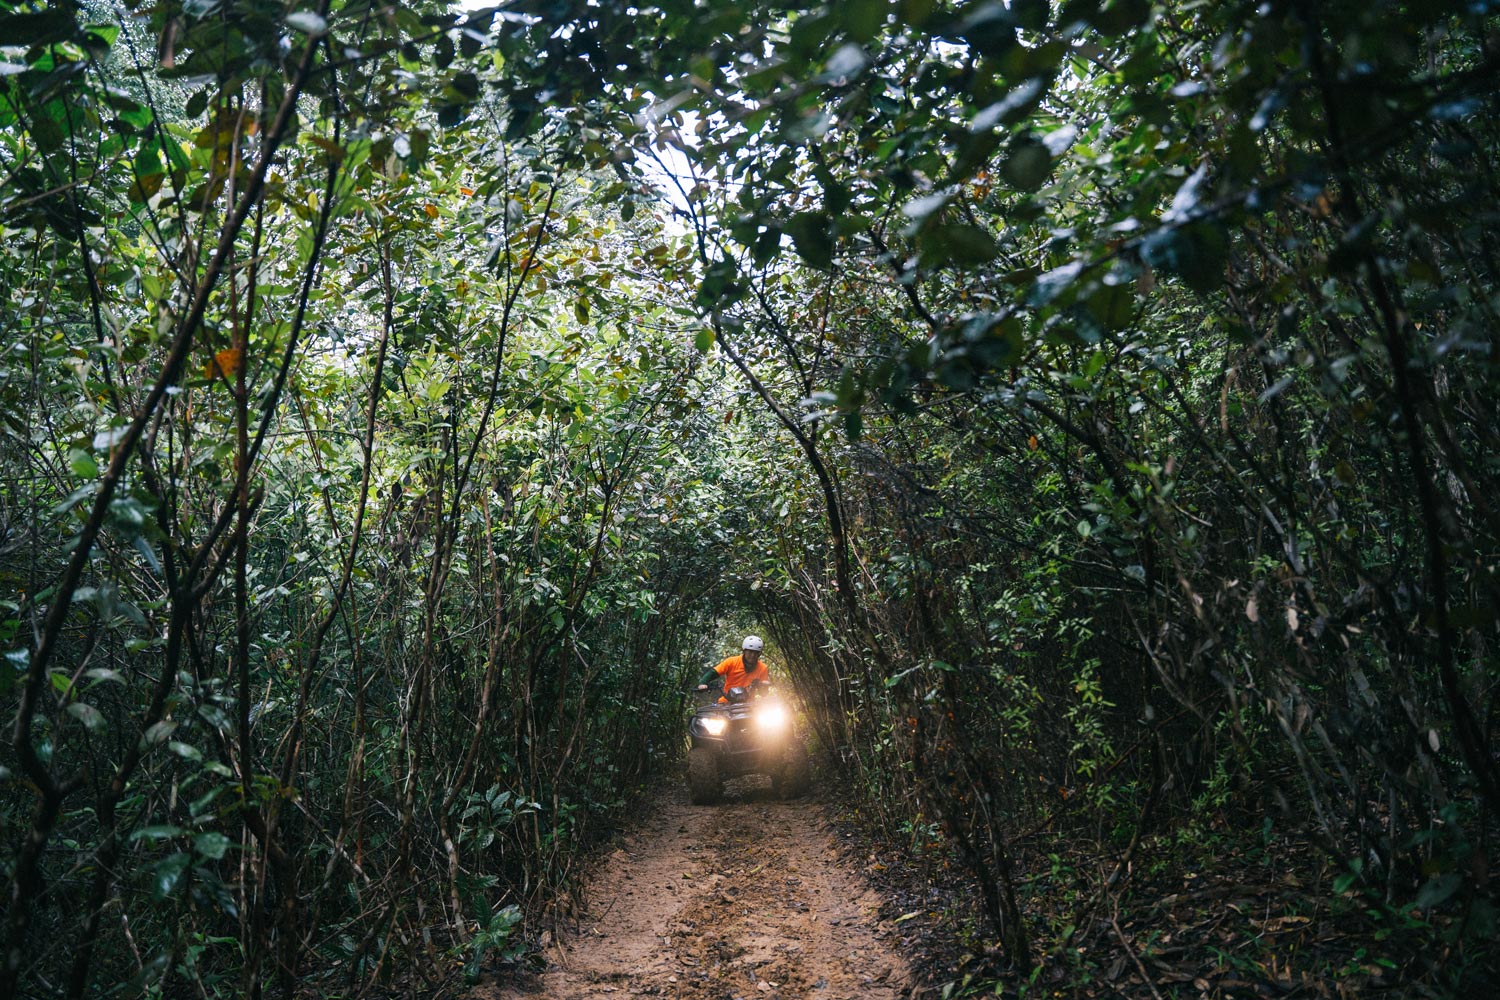 Feel the thrill as you explore Vietnam's rugged terrain on an exhilarating ATV adventure.